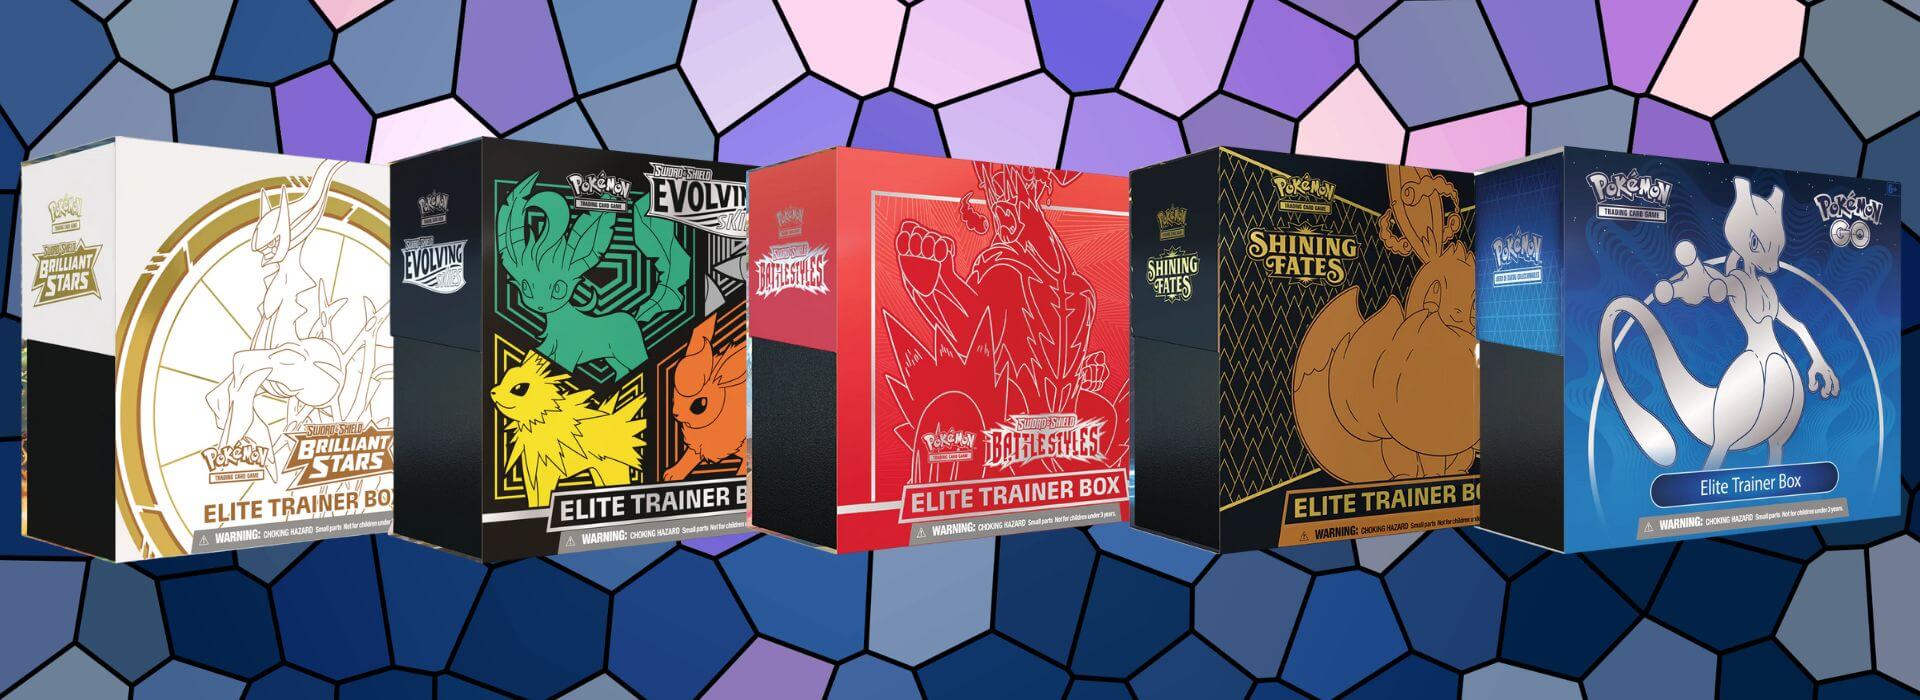 Top 5 Pokemon Elite Trainer Boxes - Ranking the Best ETBs from Sword & Shield